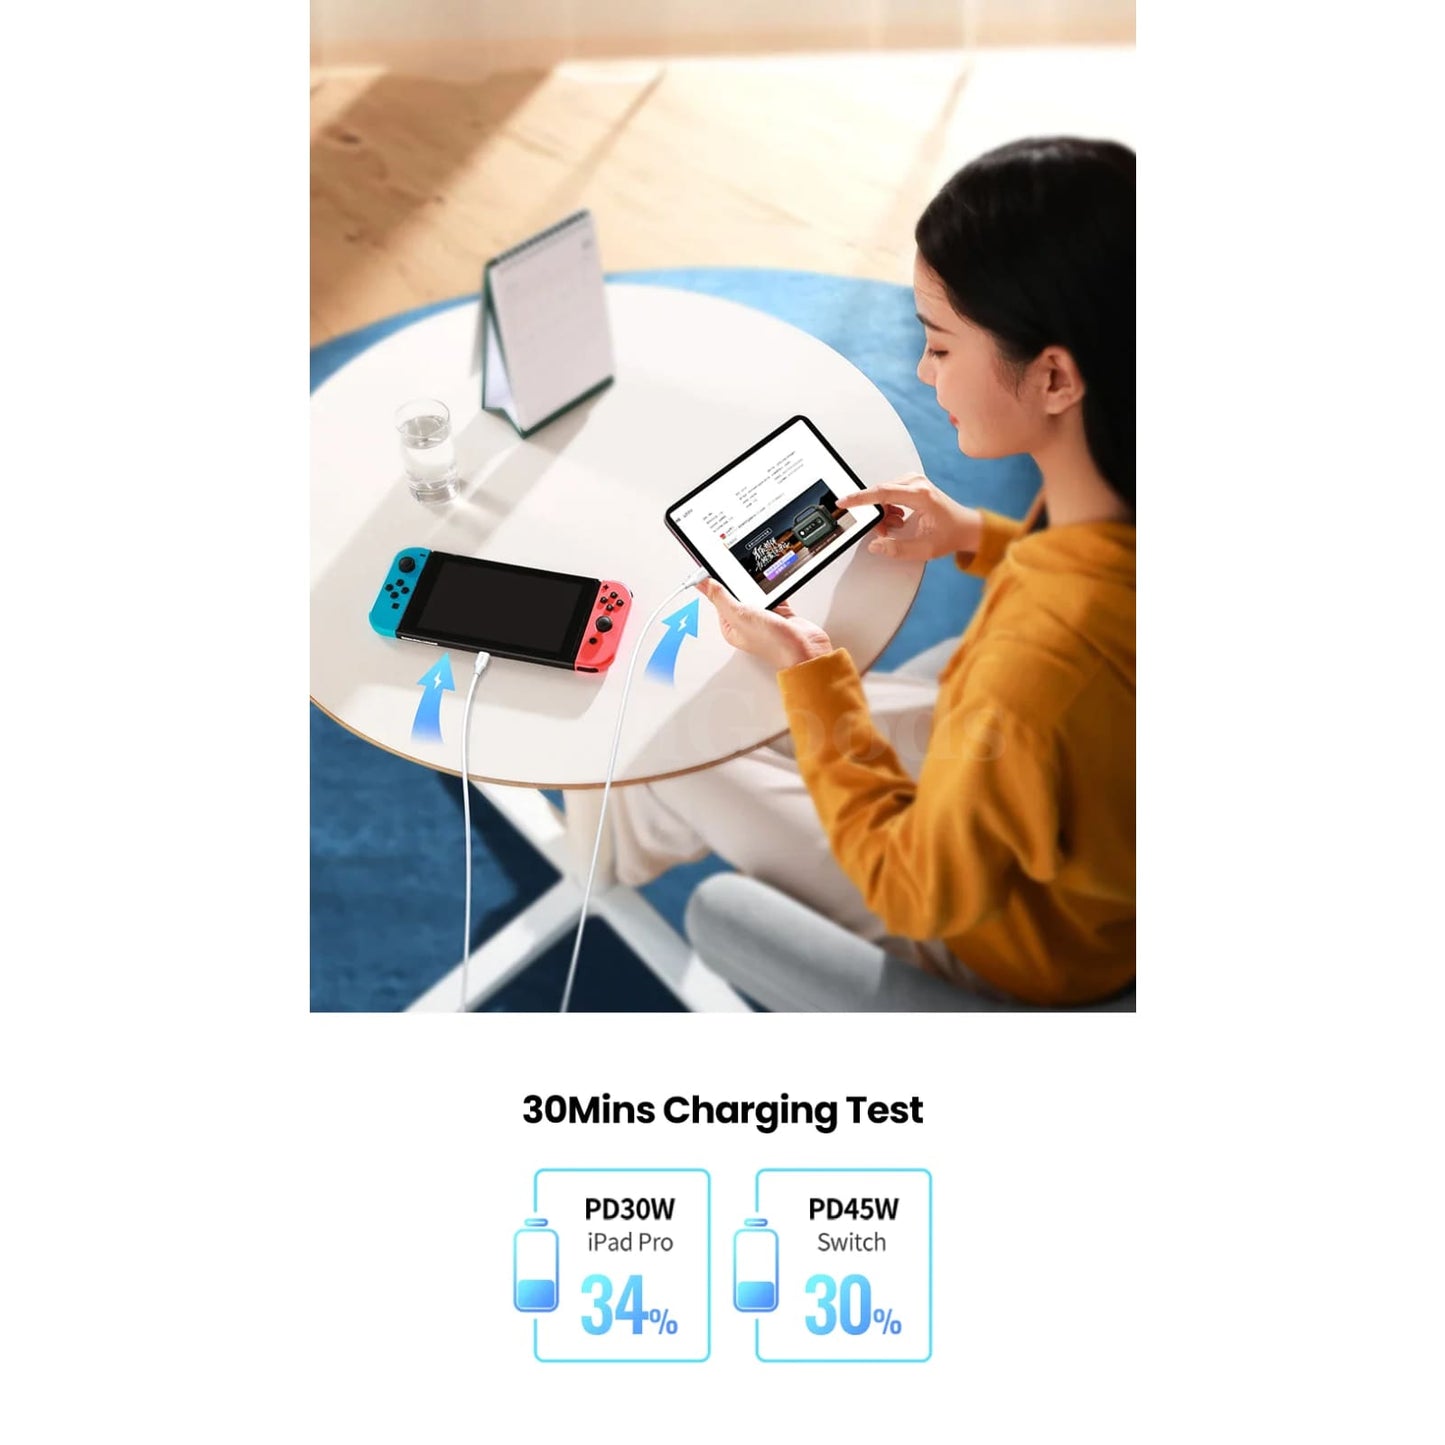 Ugreen 100W Usb C Cable Macbook Pro Samsung Galaxy 5A Fast Charging E-Marker 301635